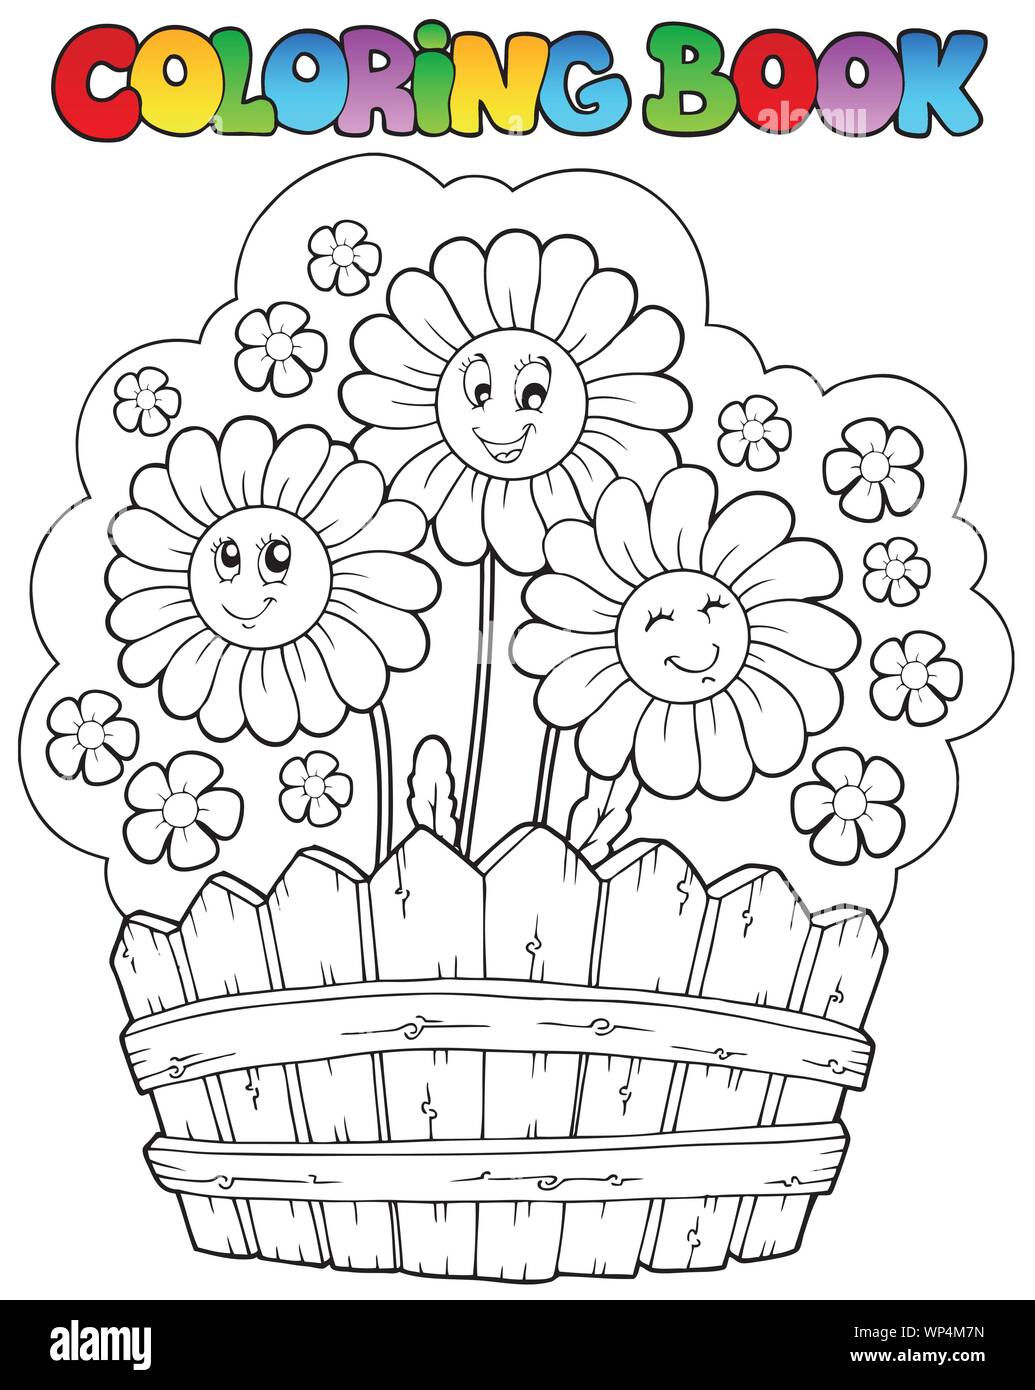 Coloring book with daisies Stock Vector